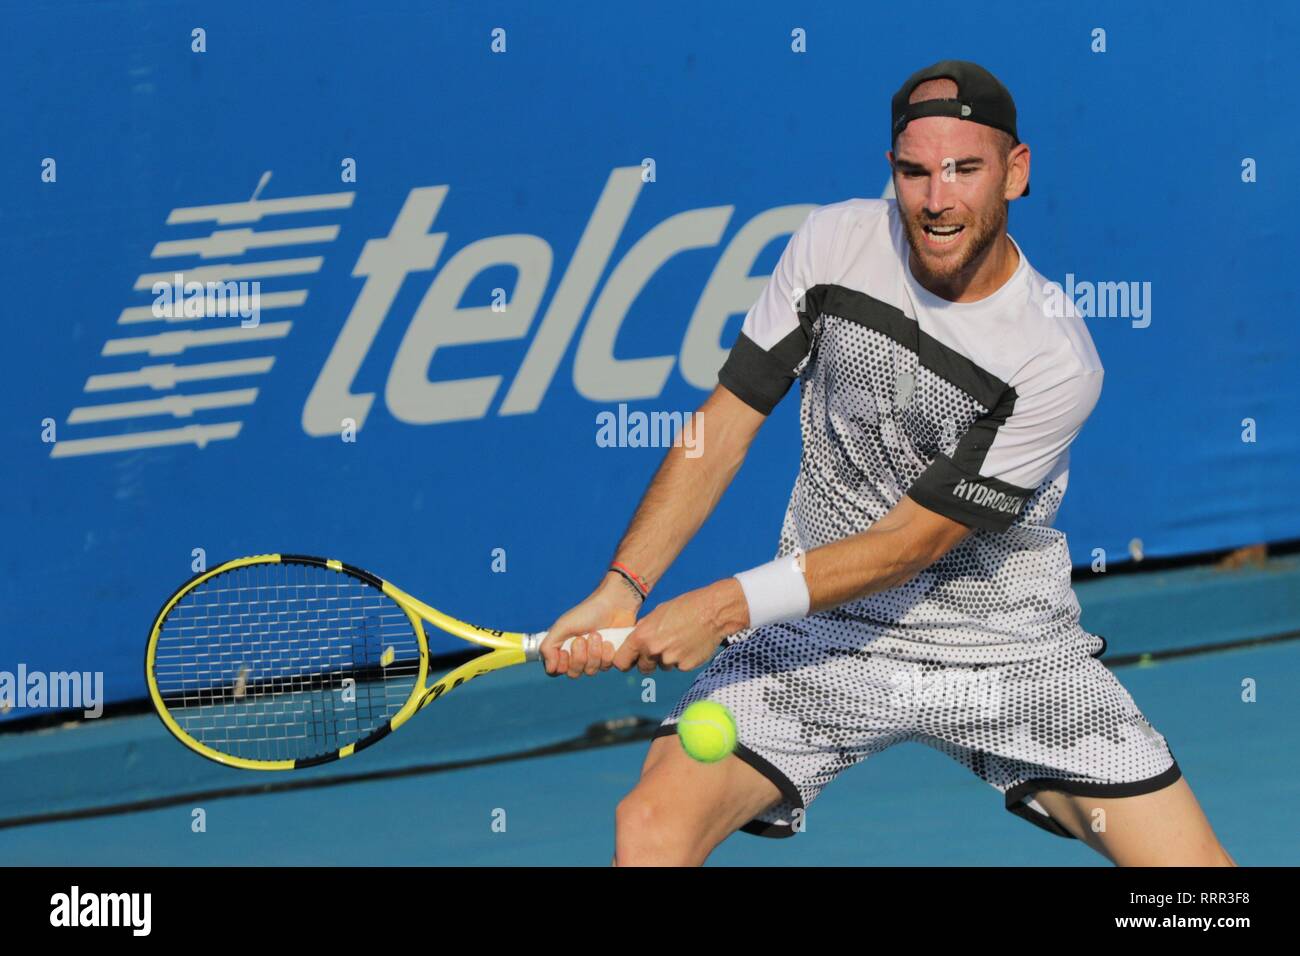 Acapulco Mexico 27th Feb 2019 French Tennis Player Adrian Mannarino Returns The Ball To Us John Isner During Their Mexico Tennis Open Match In Acapulco Guerrero Mexico 26 February 2019 Credit David